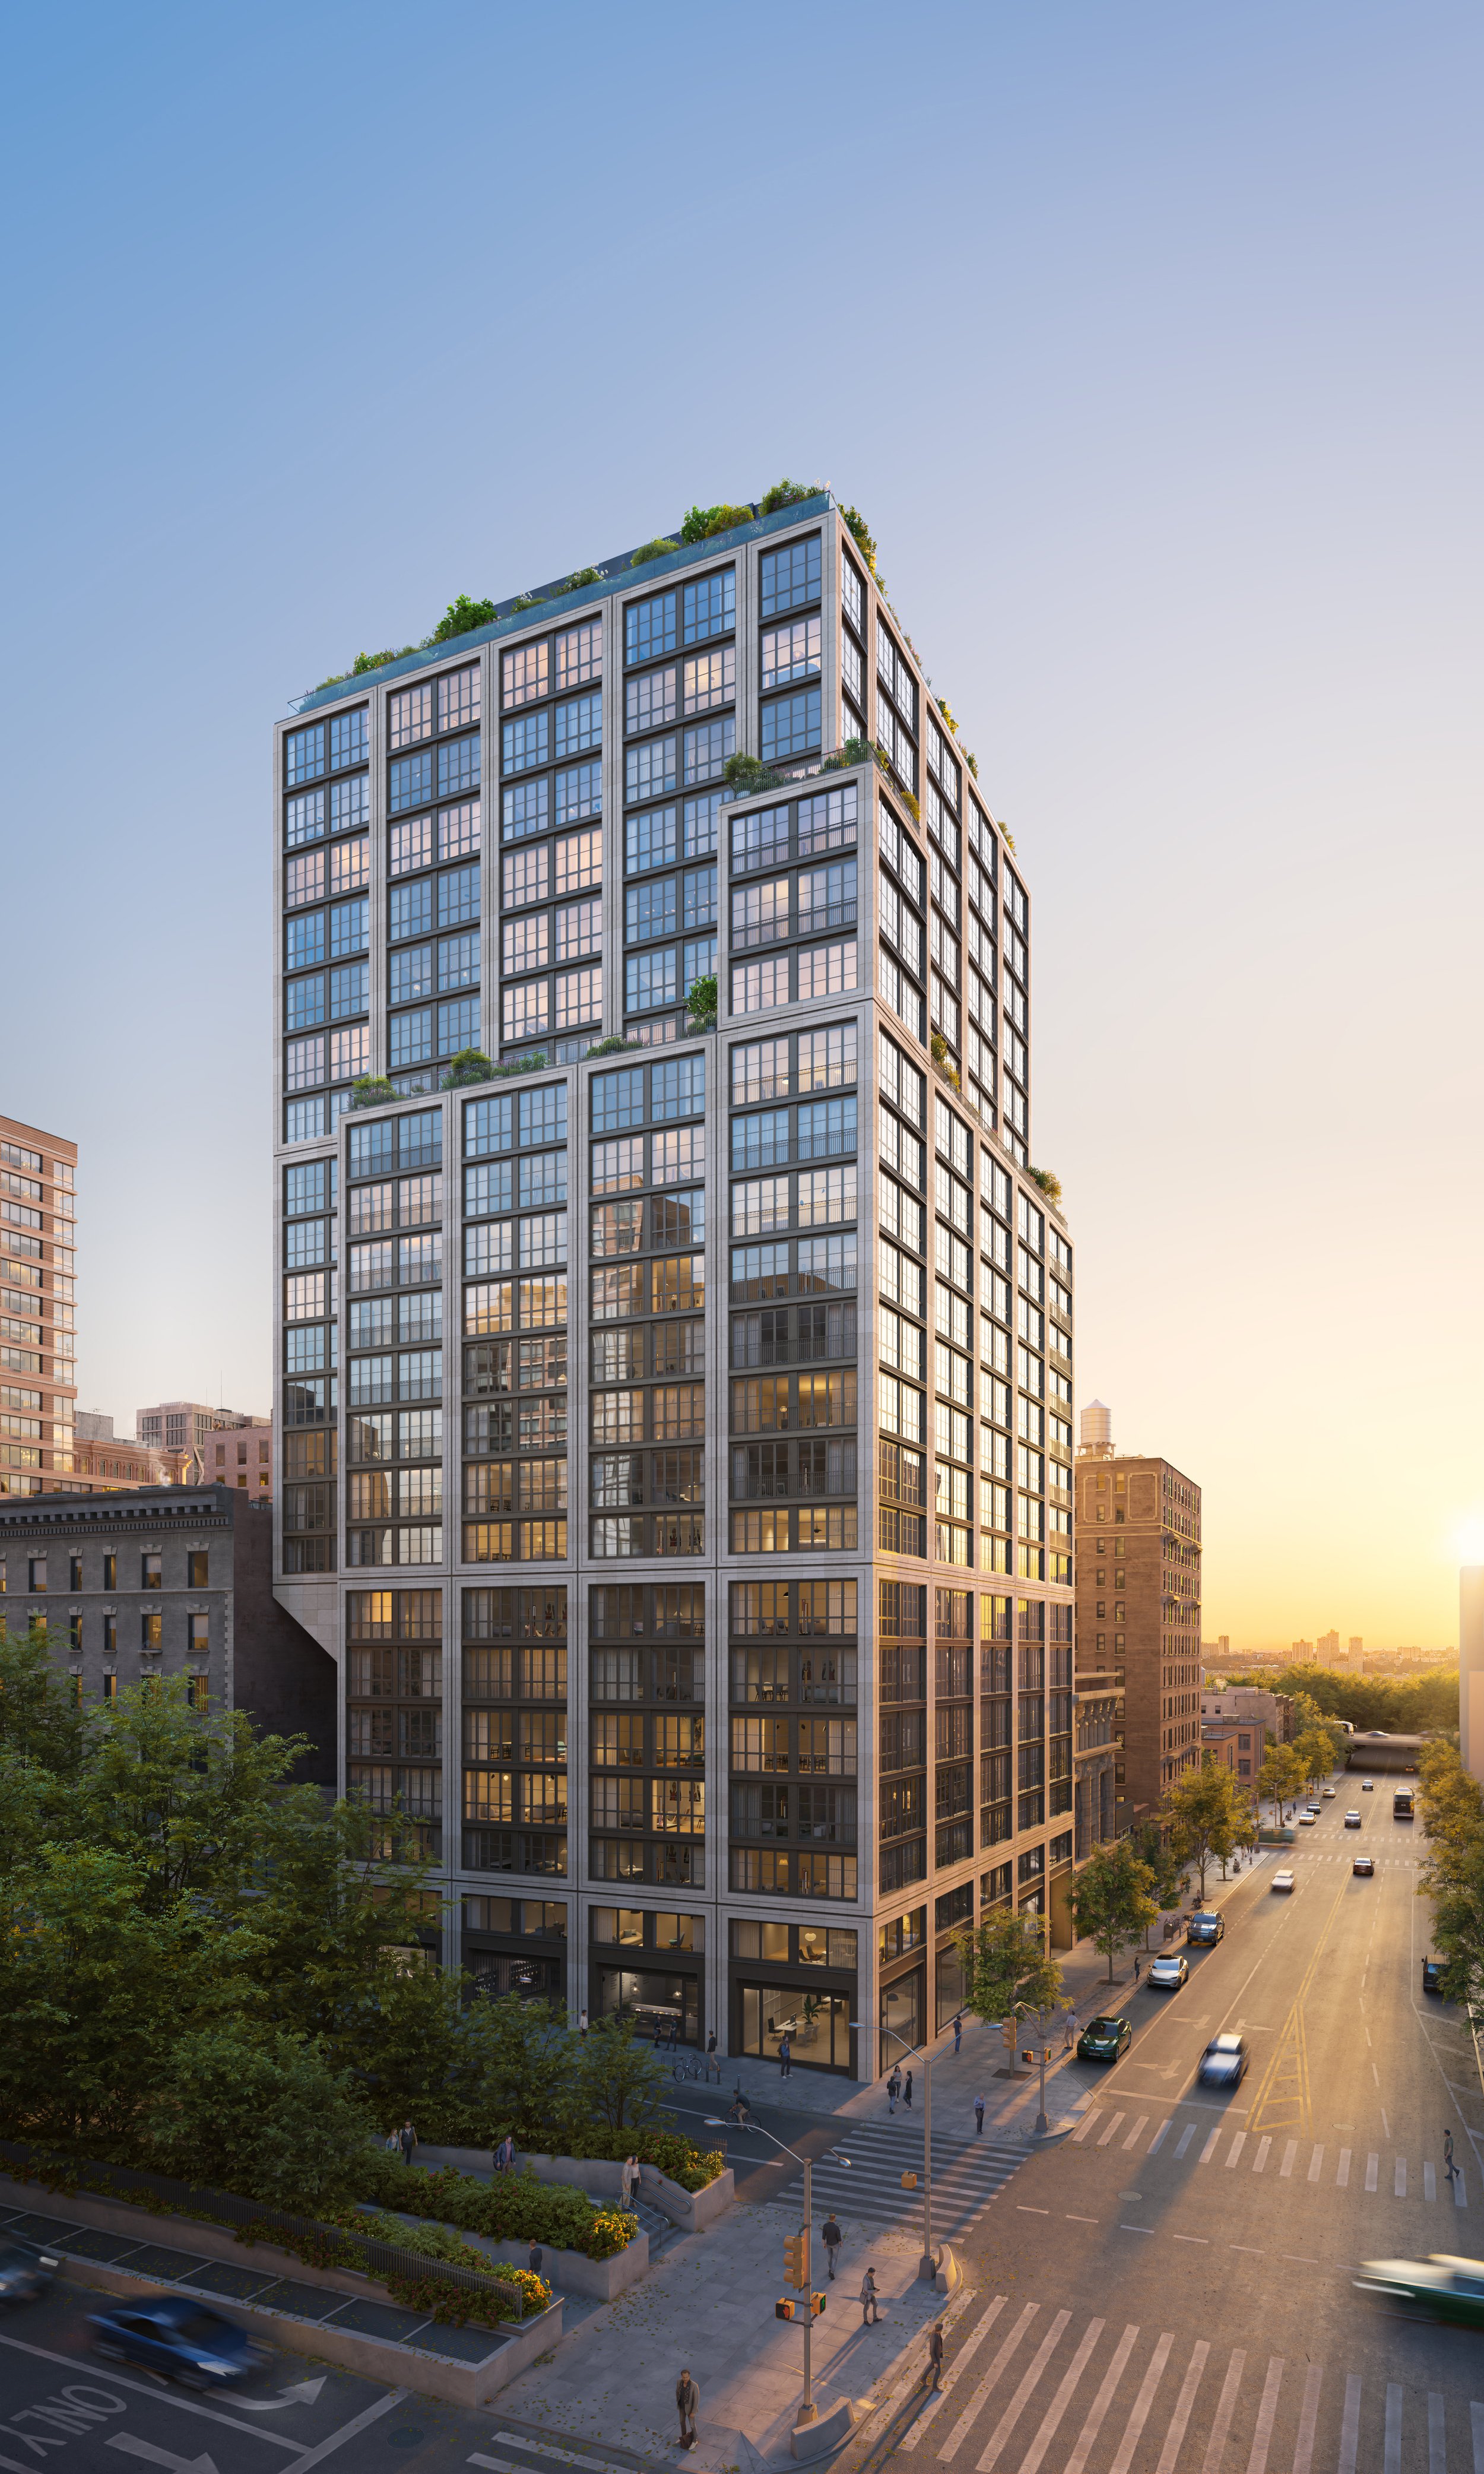  Sales have launched at 96+Broadway, the much-anticipated Upper West Side luxury condominium building situated on 250 West 96th Street, between Riverside Park and Central Park. Developed by JVP Management, a private real estate development and invest